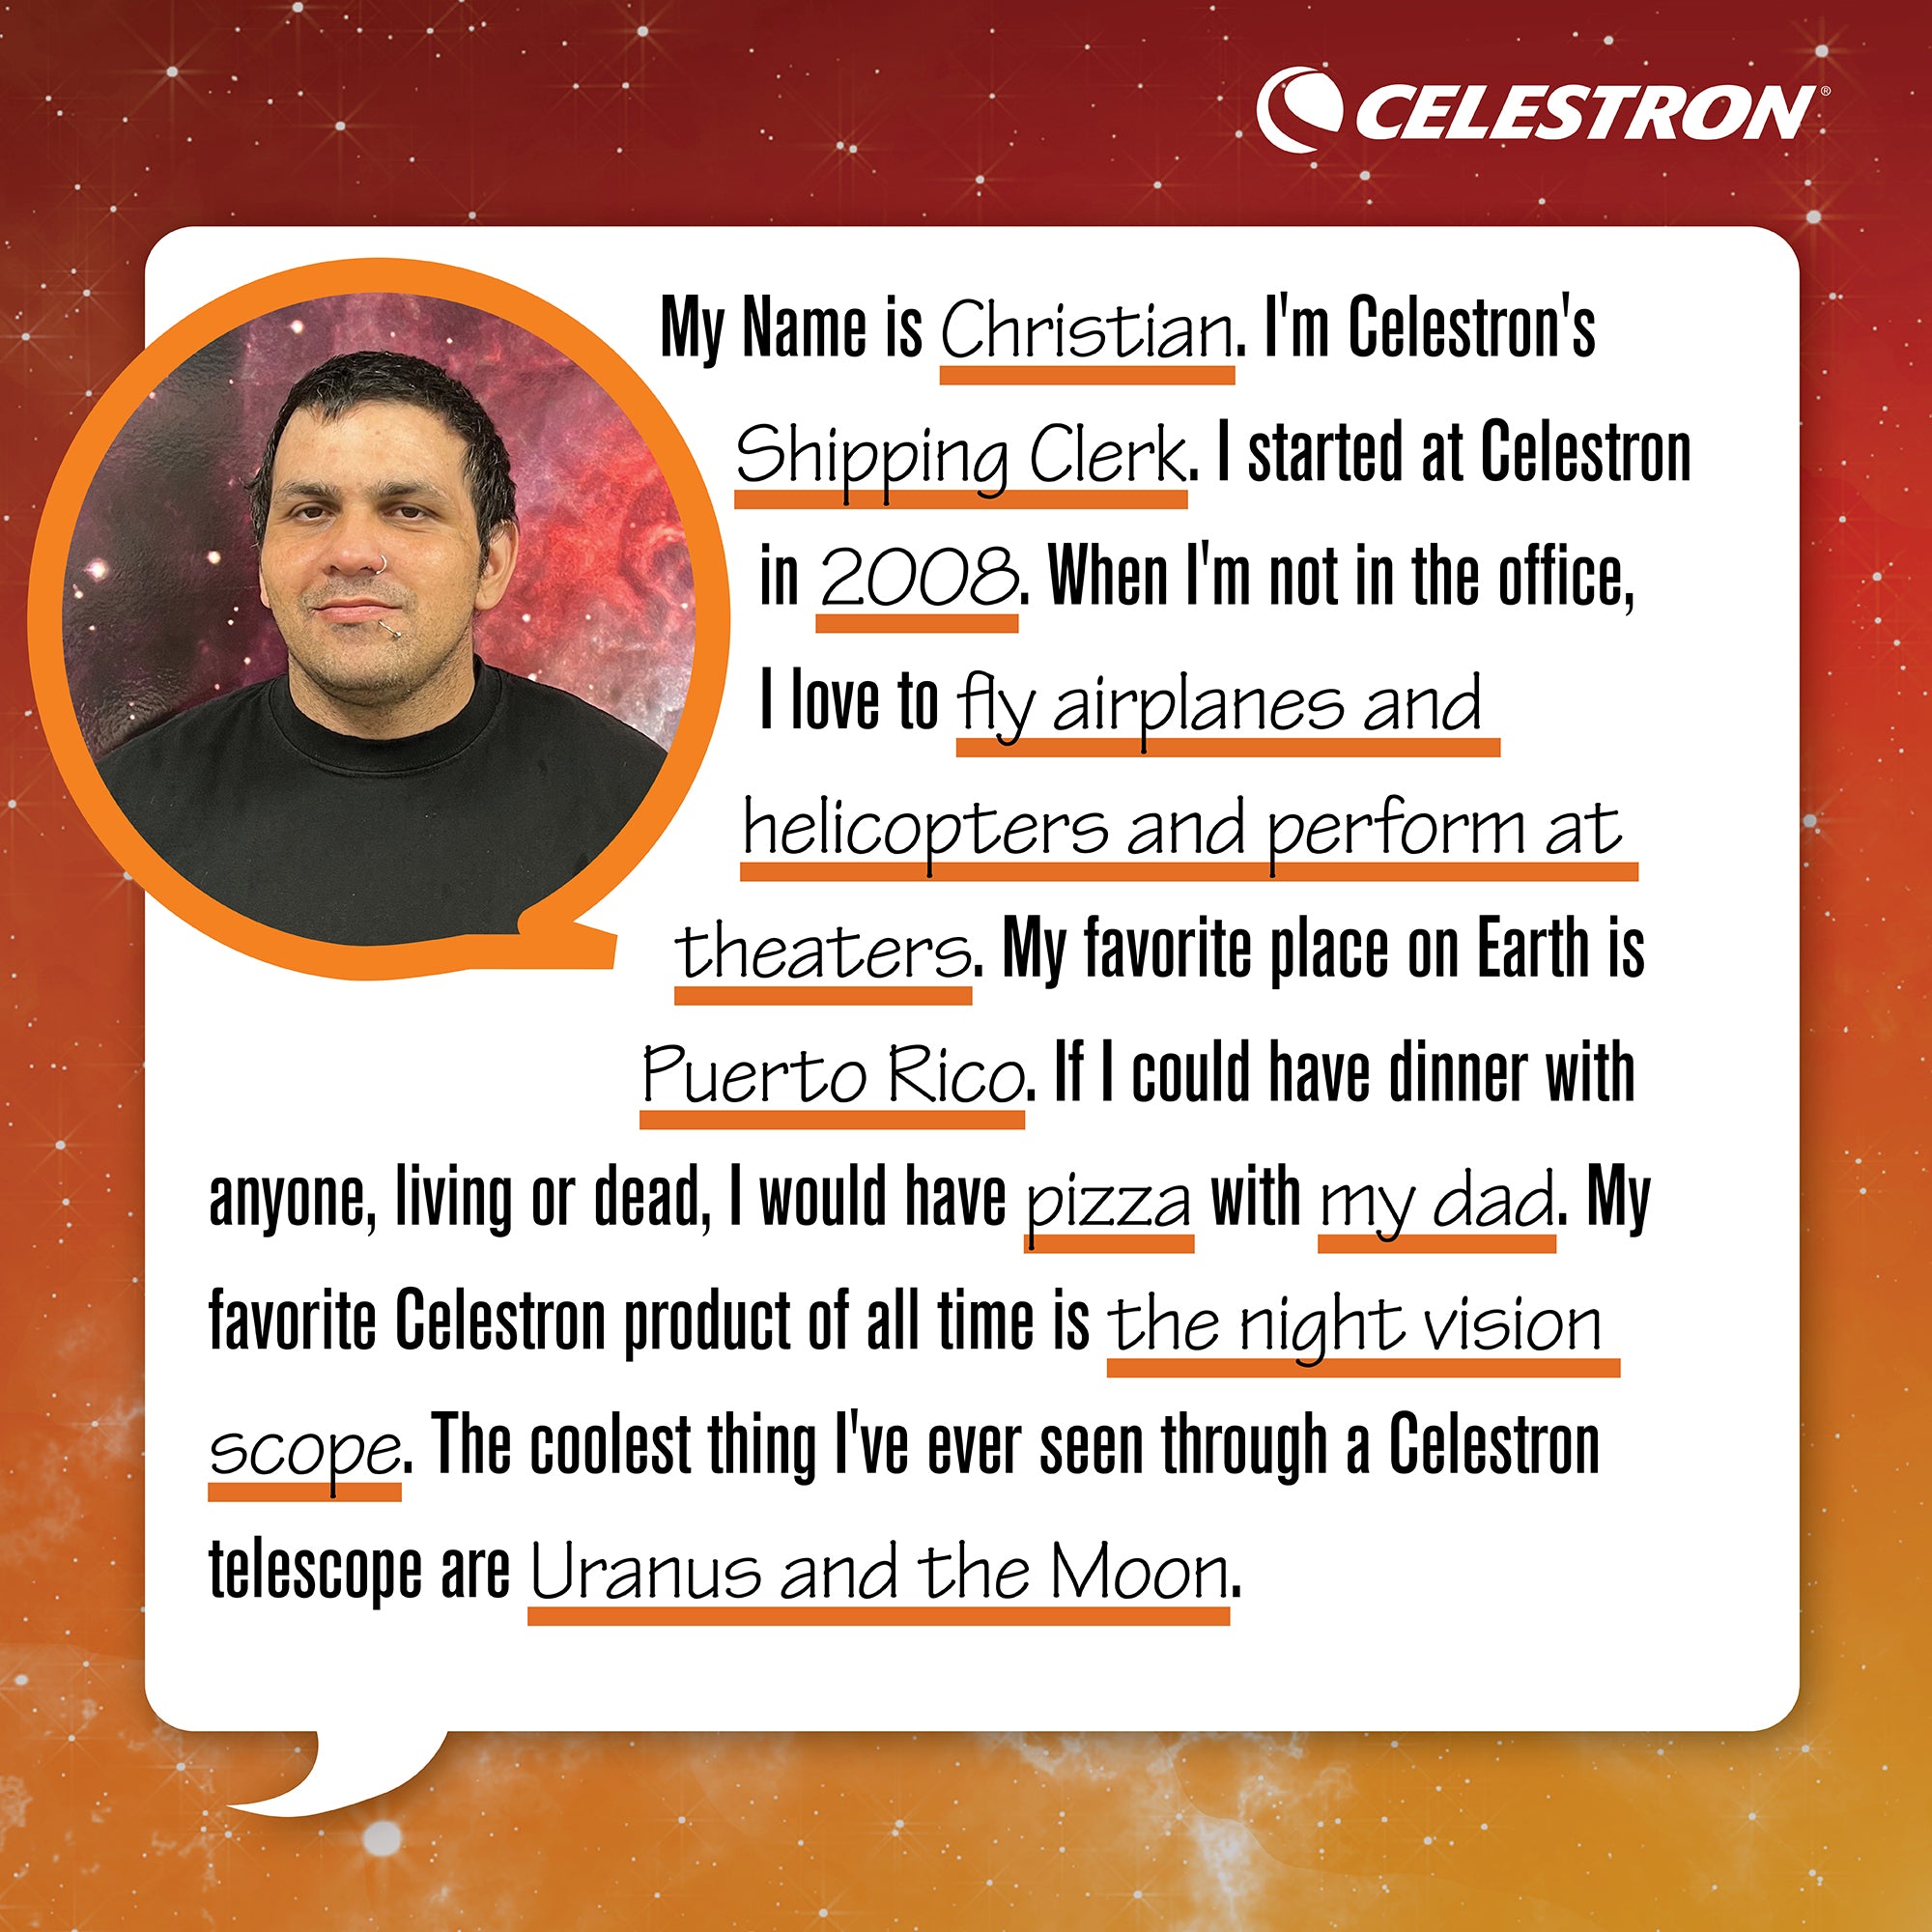 My name is Elena. I'm Celestron's technical support representative. I started at Celestron in 2008. When I'm not in the office, I love to dance flamenco and perform at theaters.  My favorite place on Earth is Rio de Janiero. If I could have dinner with anyone, living or dead, I would have dinner with my mother. My favorite Celestron product of all time is the Advanced VX 8 EdgeHD. The coolest thing I’ve ever seen through a Celestron telescope is the Orion Nebula (m42).